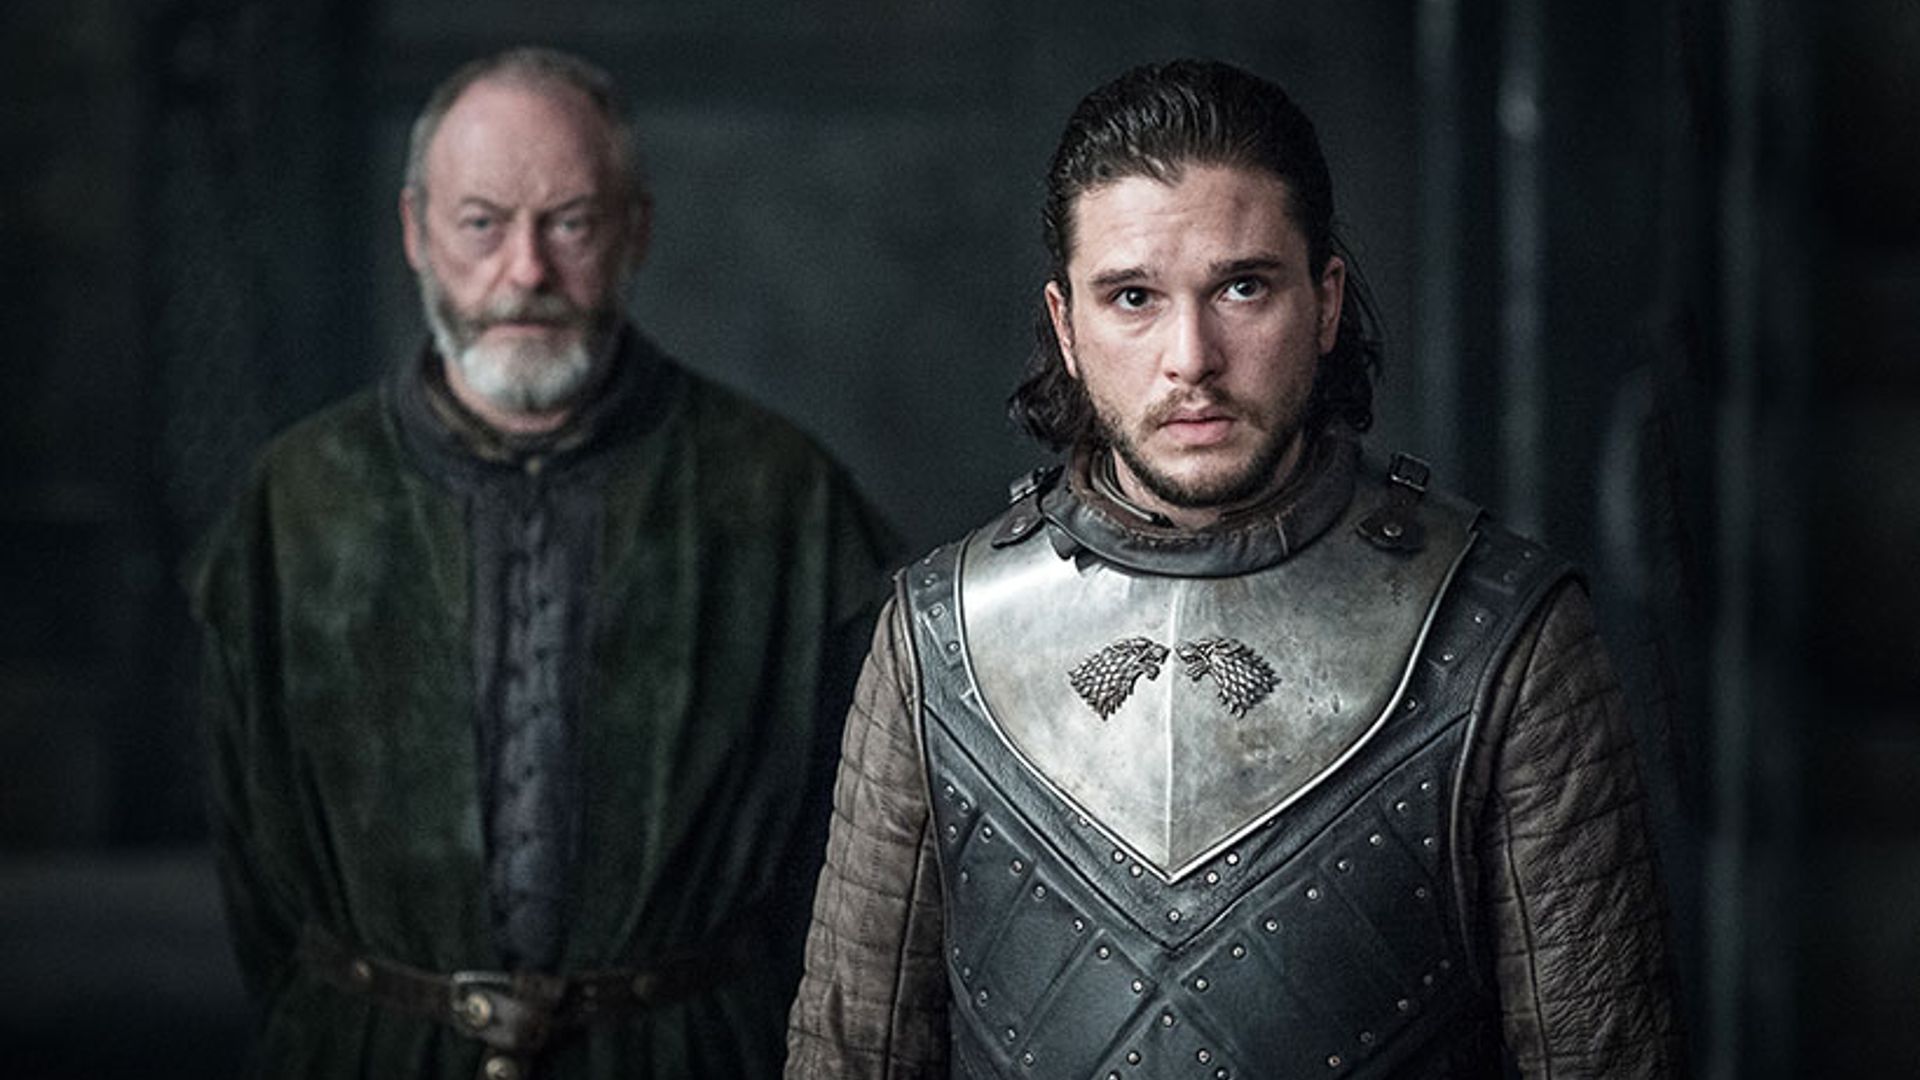 Game of Thrones episode three photos hint at Jon Snow and Daenerys Targaryen's long-awaited meeting – see the snaps!